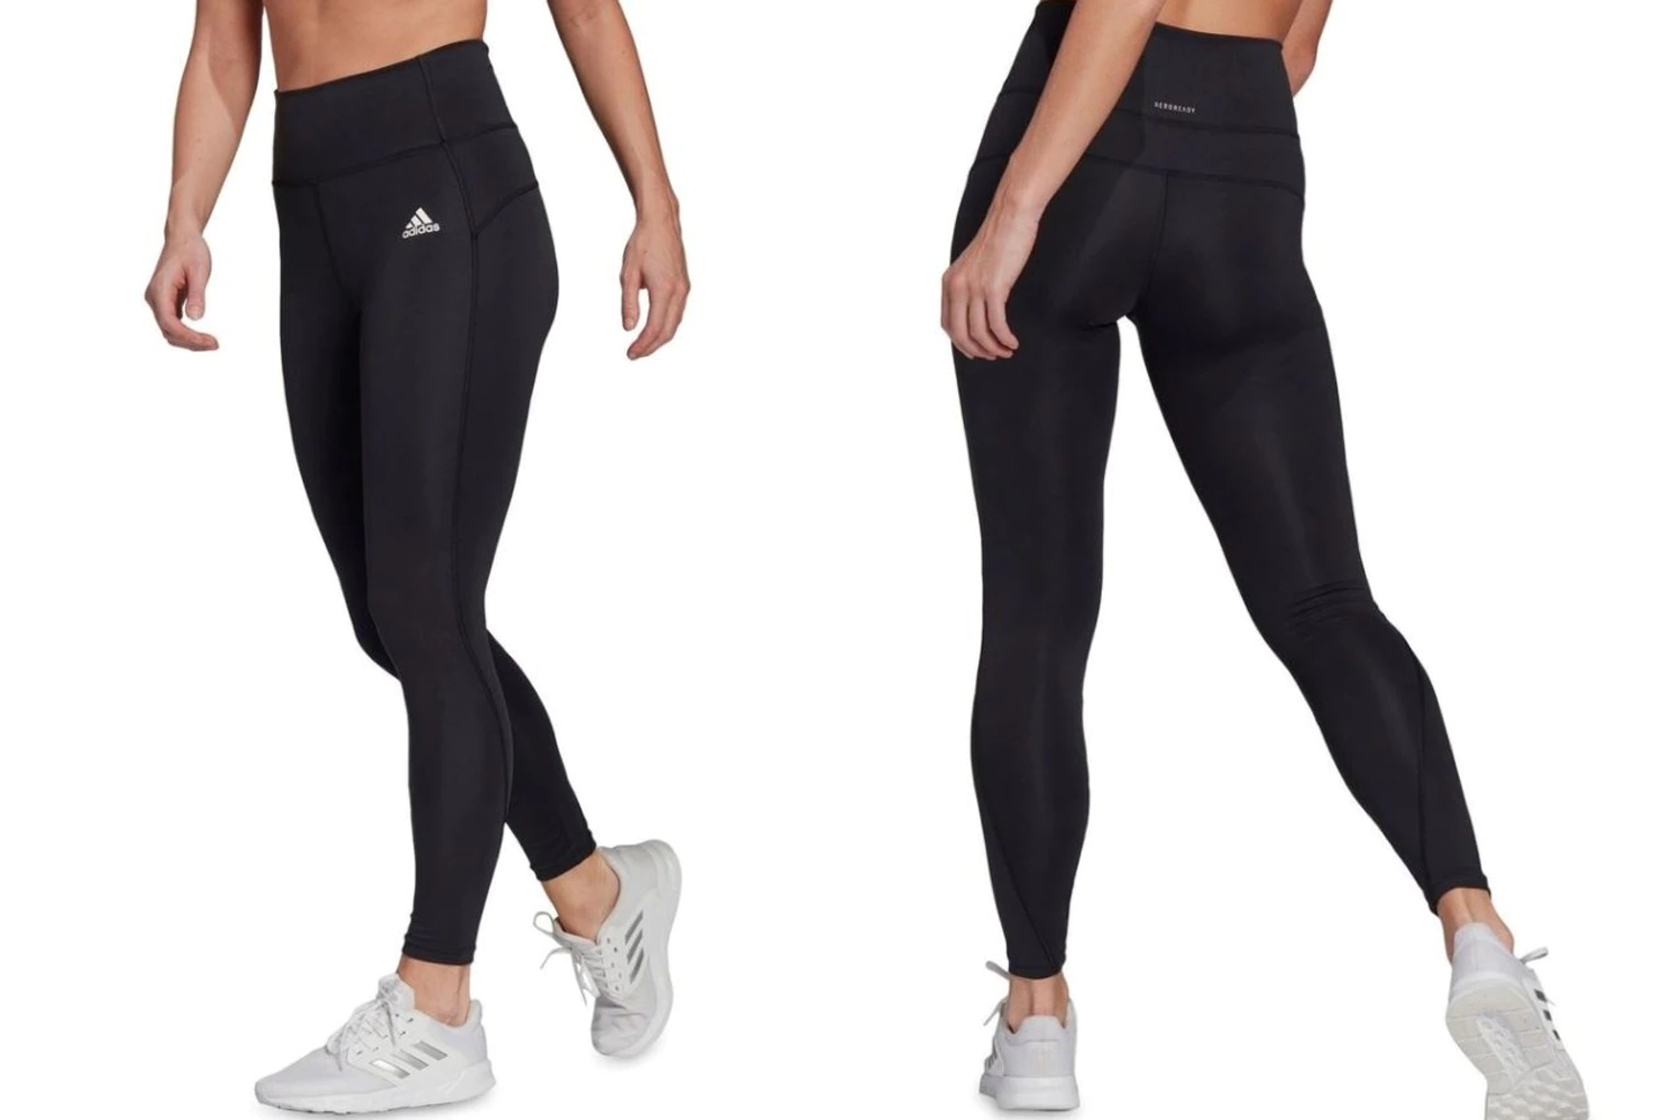 Adidas FeelBrilliant tights review: The only gym pants you'll ever